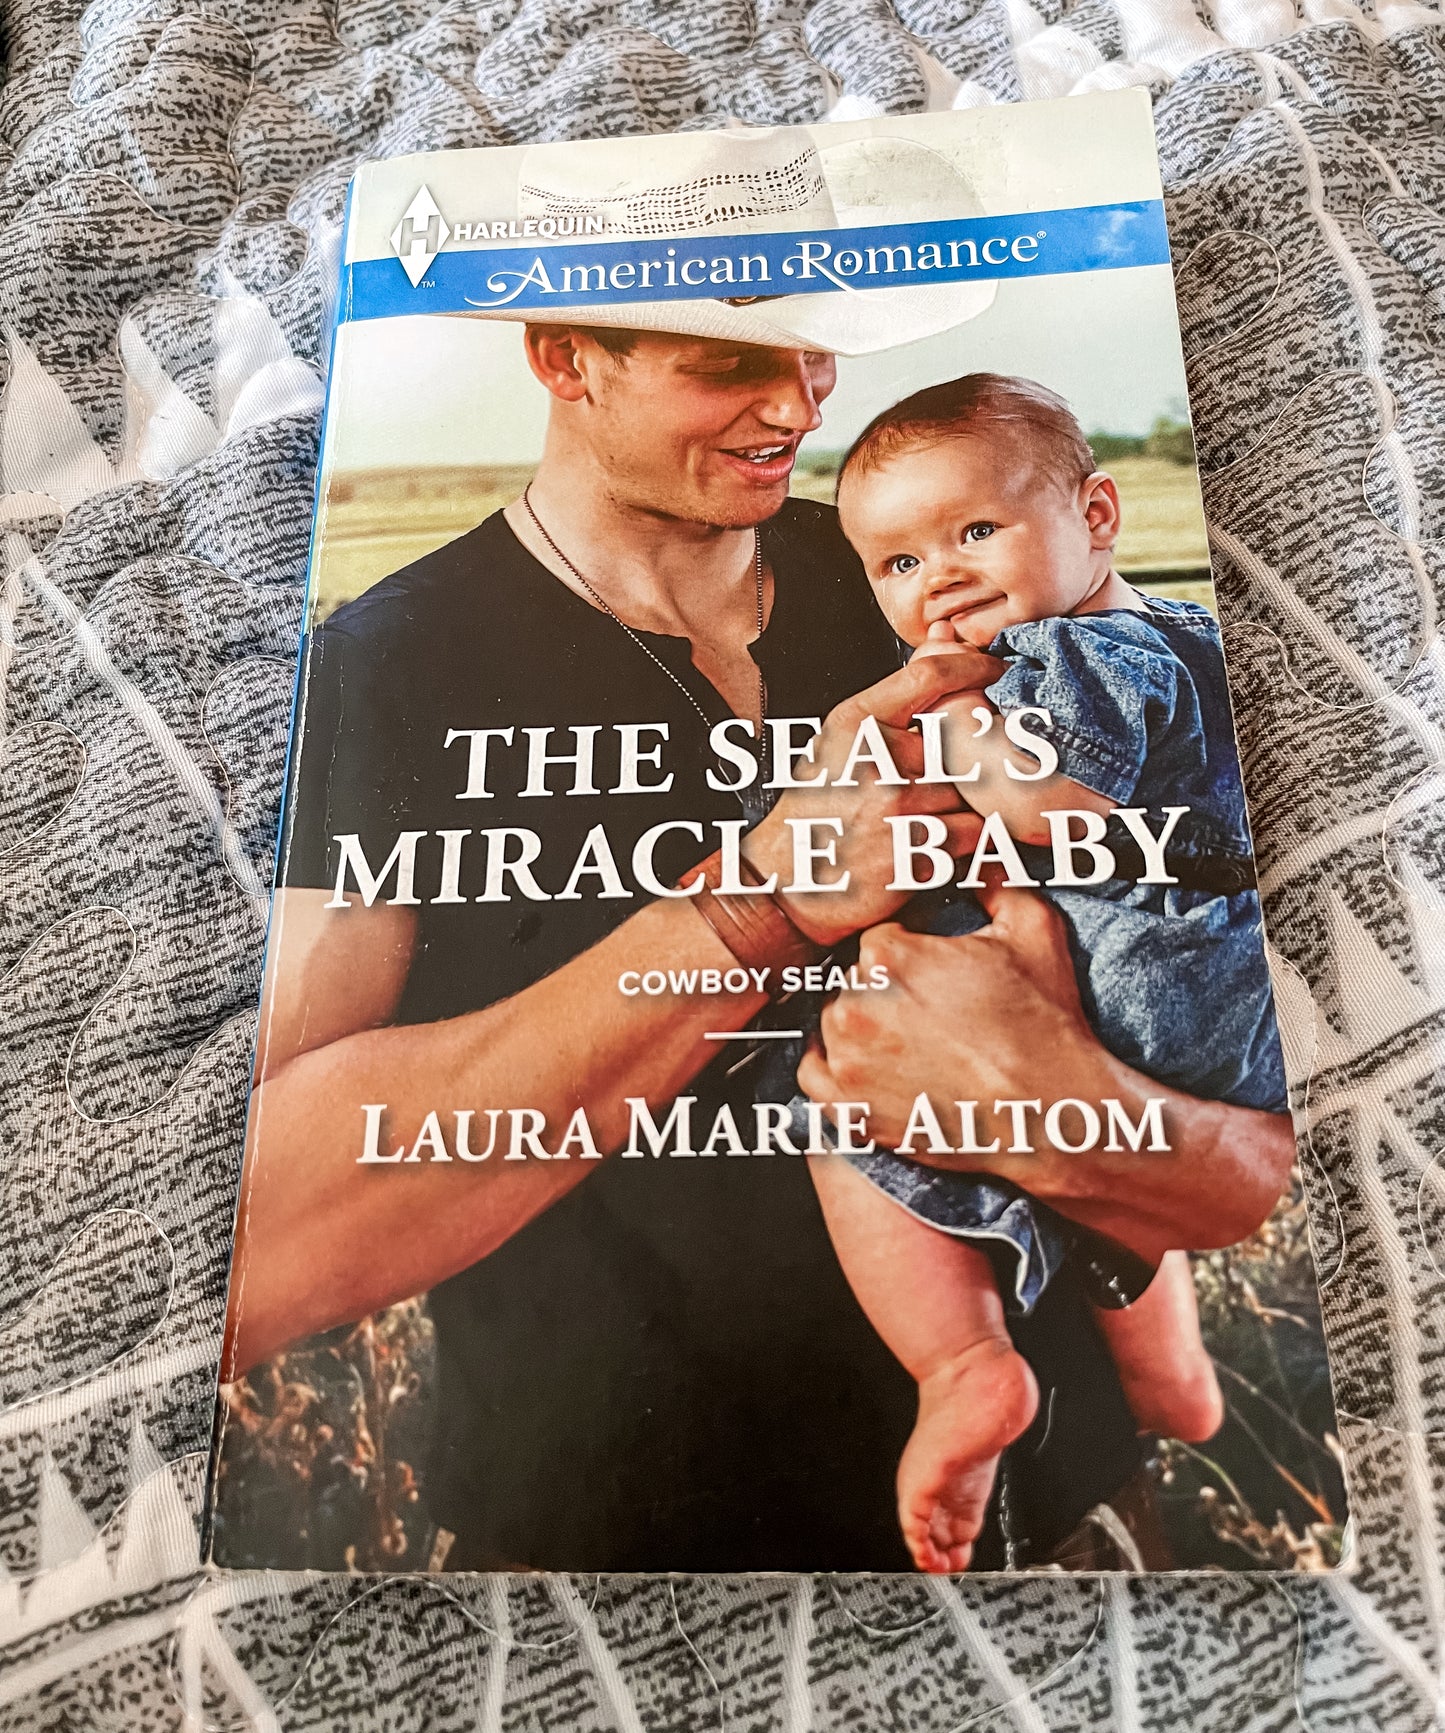 The Seal's Miracle Baby by Laura Marie Altom